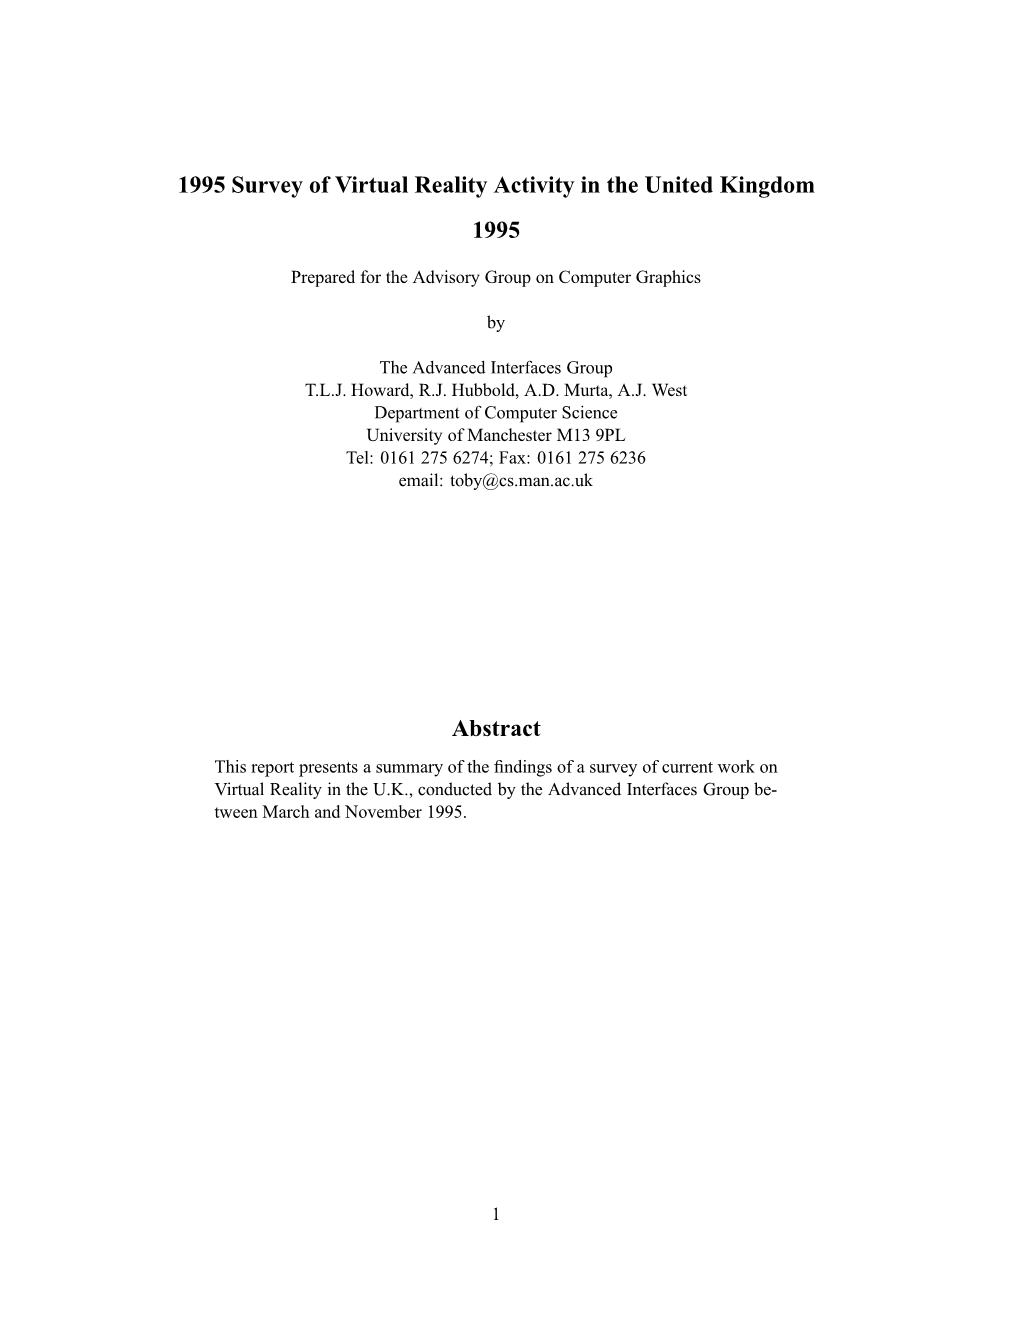 1995 Survey of Virtual Reality Activity in the United Kingdom 1995 Abstract